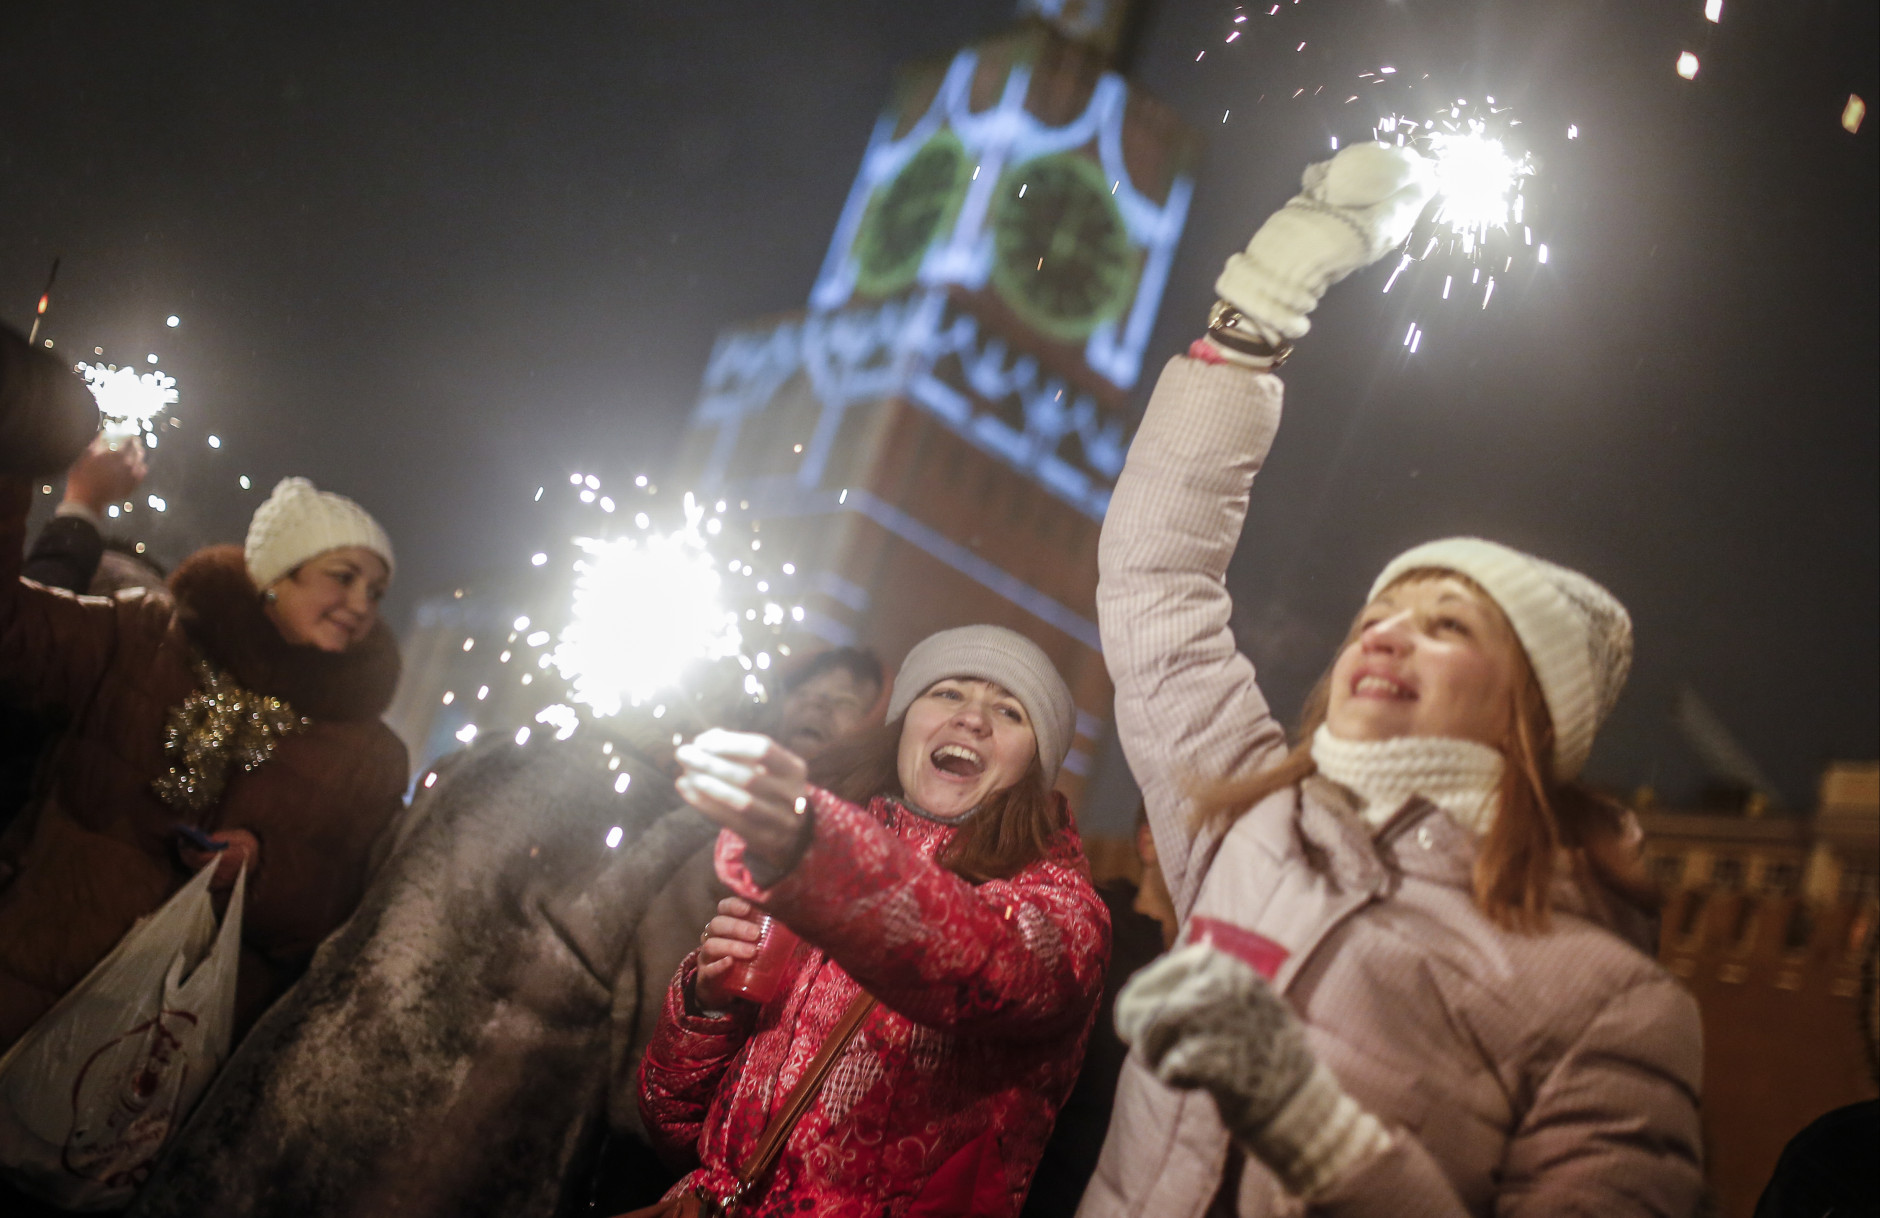 People light sparklers as they celebrate the New Year at the Red Square in Moscow, Russia, Thursday, Jan. 1, 2015. (AP Photo/Denis Tyrin)